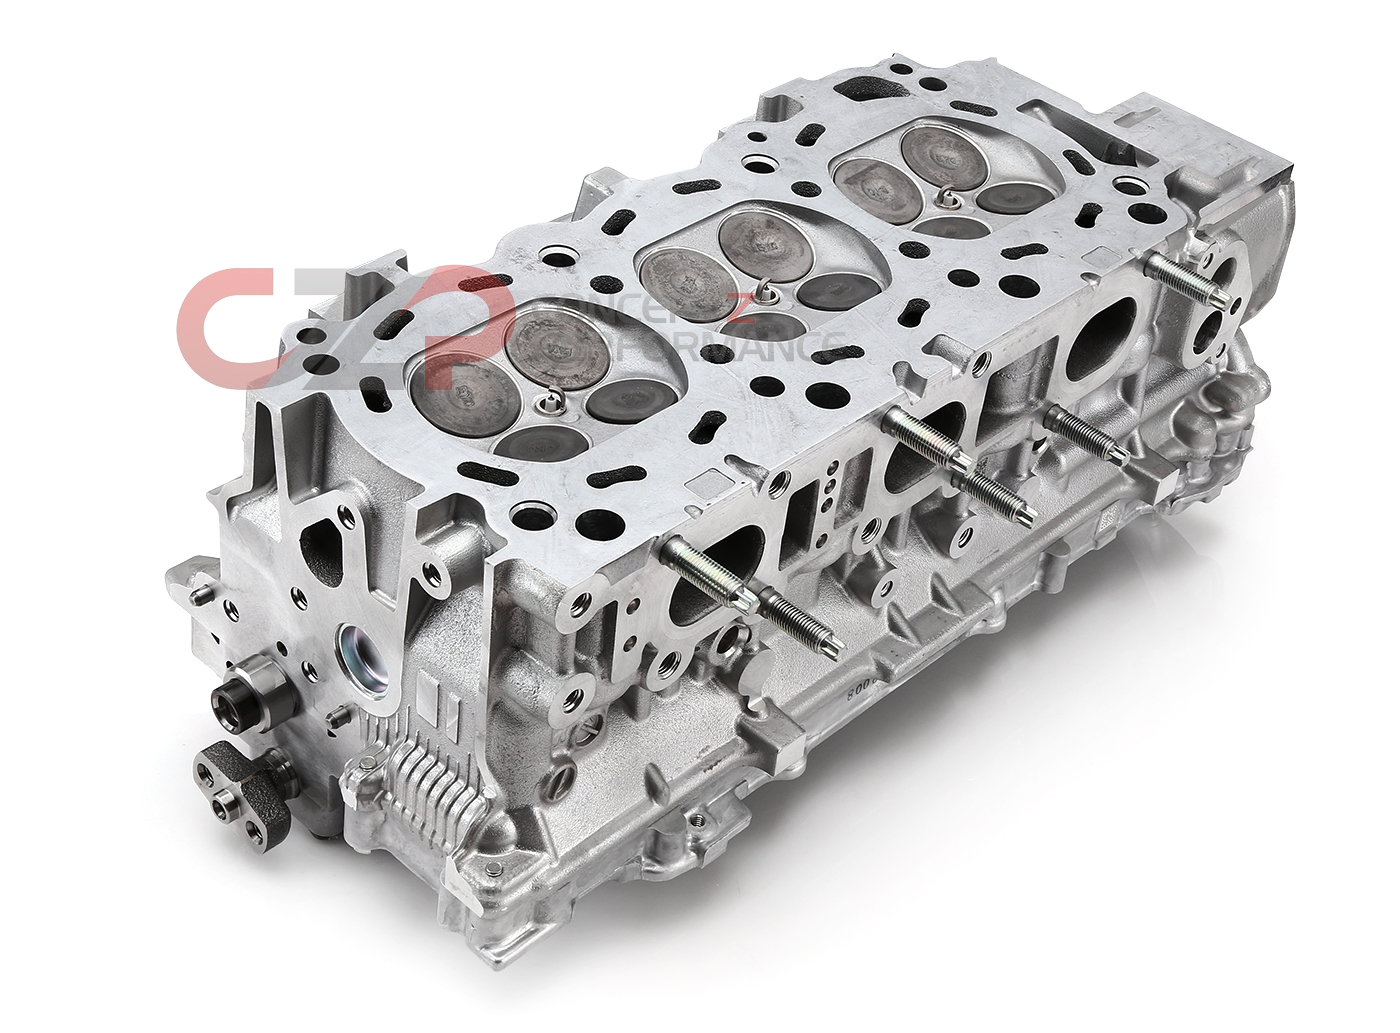 Nissan / Infiniti Nissan OEM Complete Cylinder Head Assembly 